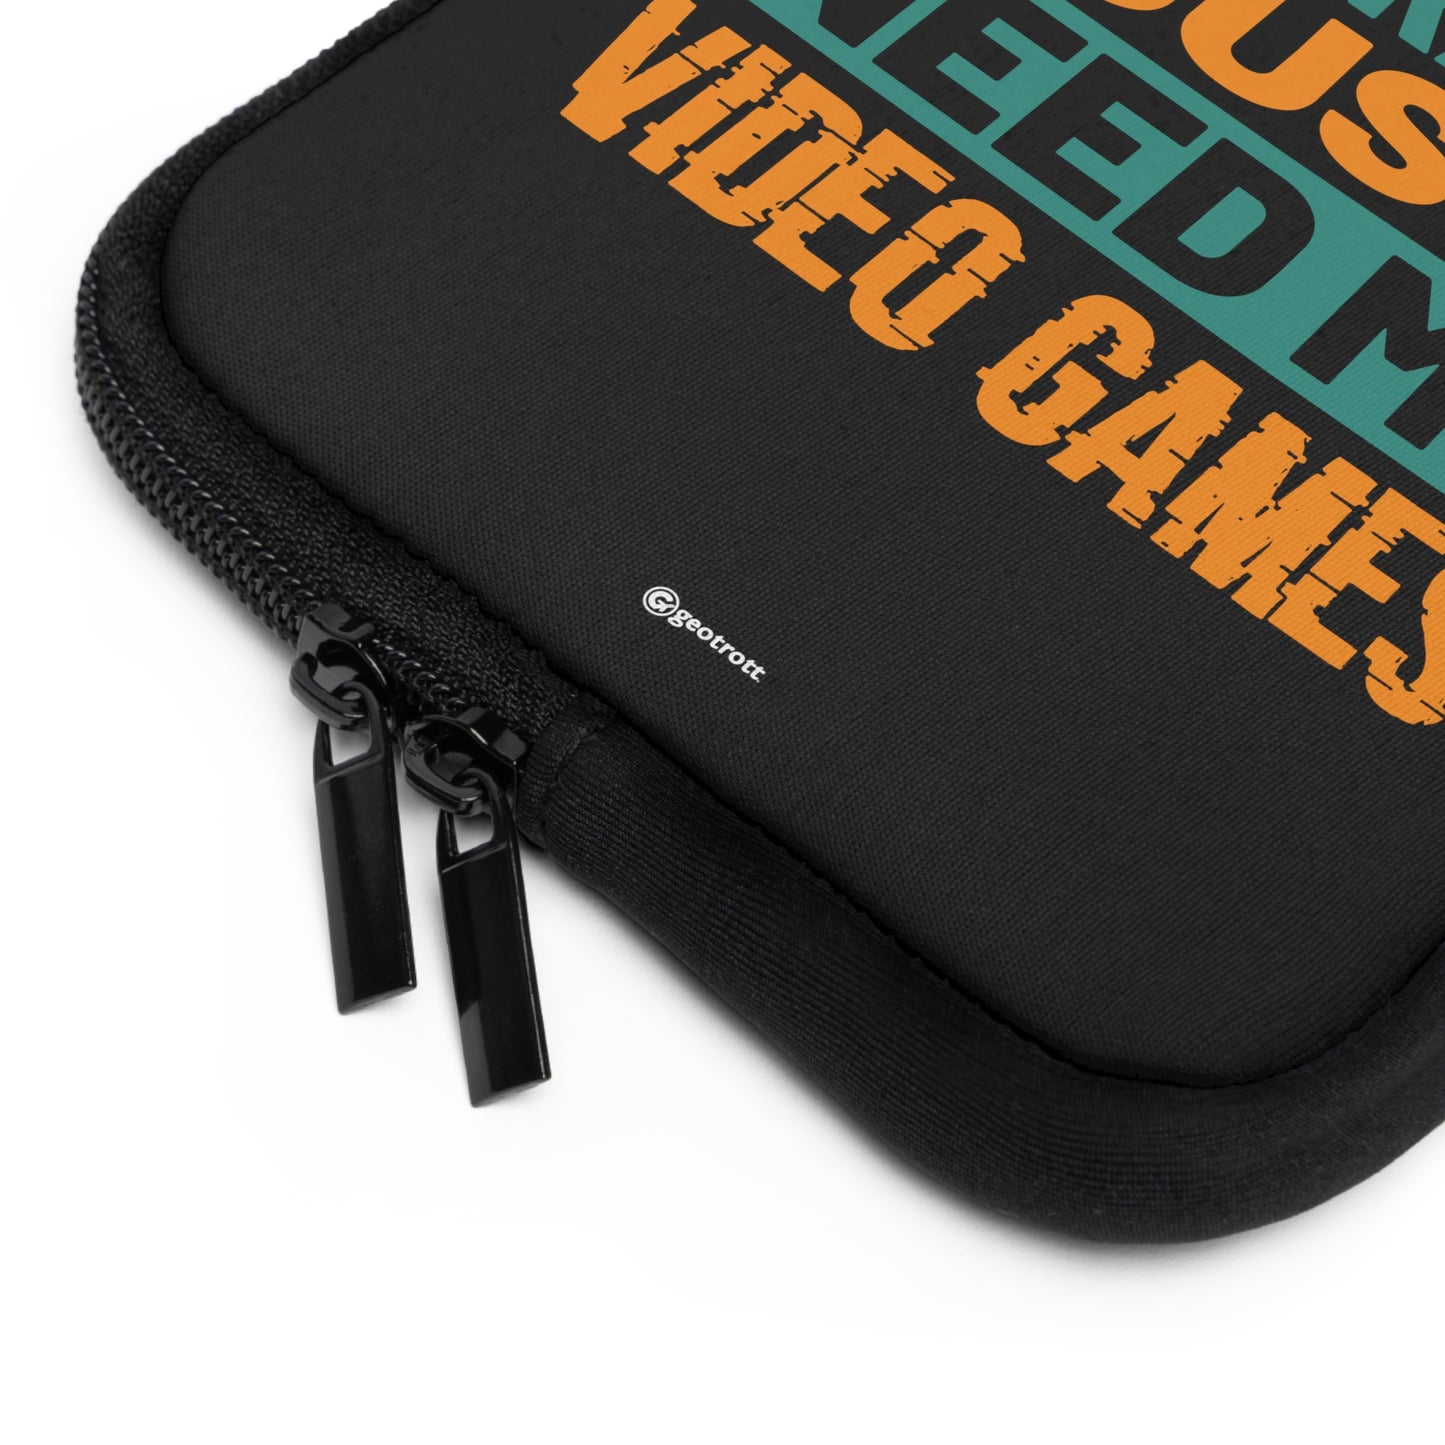 I don't need Therapy just need Video Games Gamer Gaming Lightweight Smooth Neoprene Laptop Sleeve